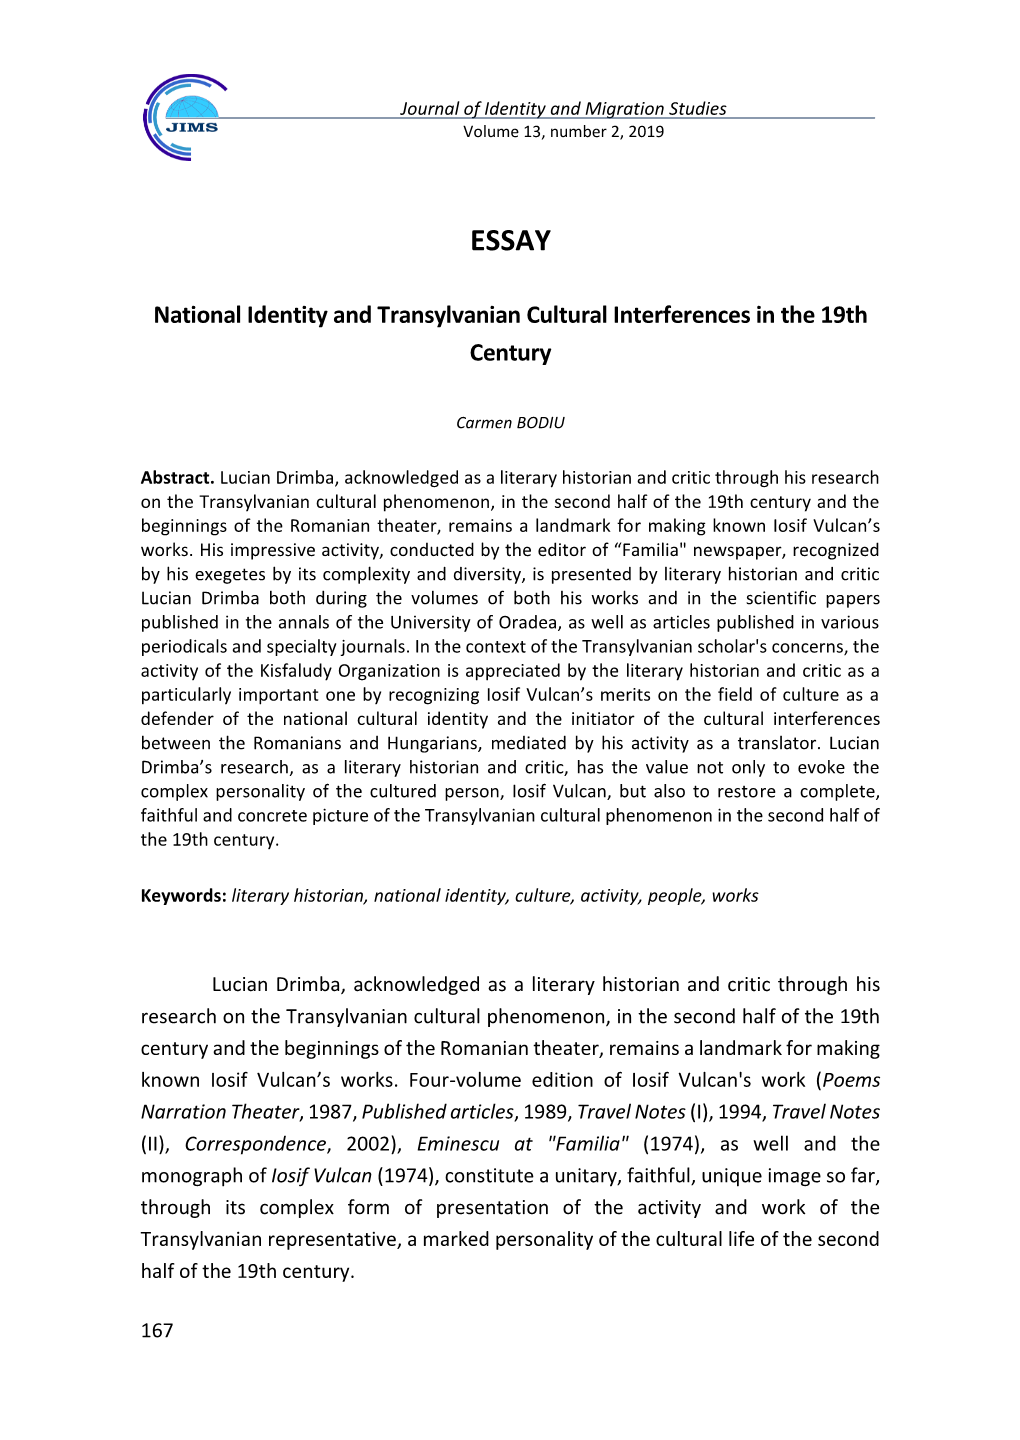 National Identity and Transylvanian Cultural Interferences in the 19Th Century